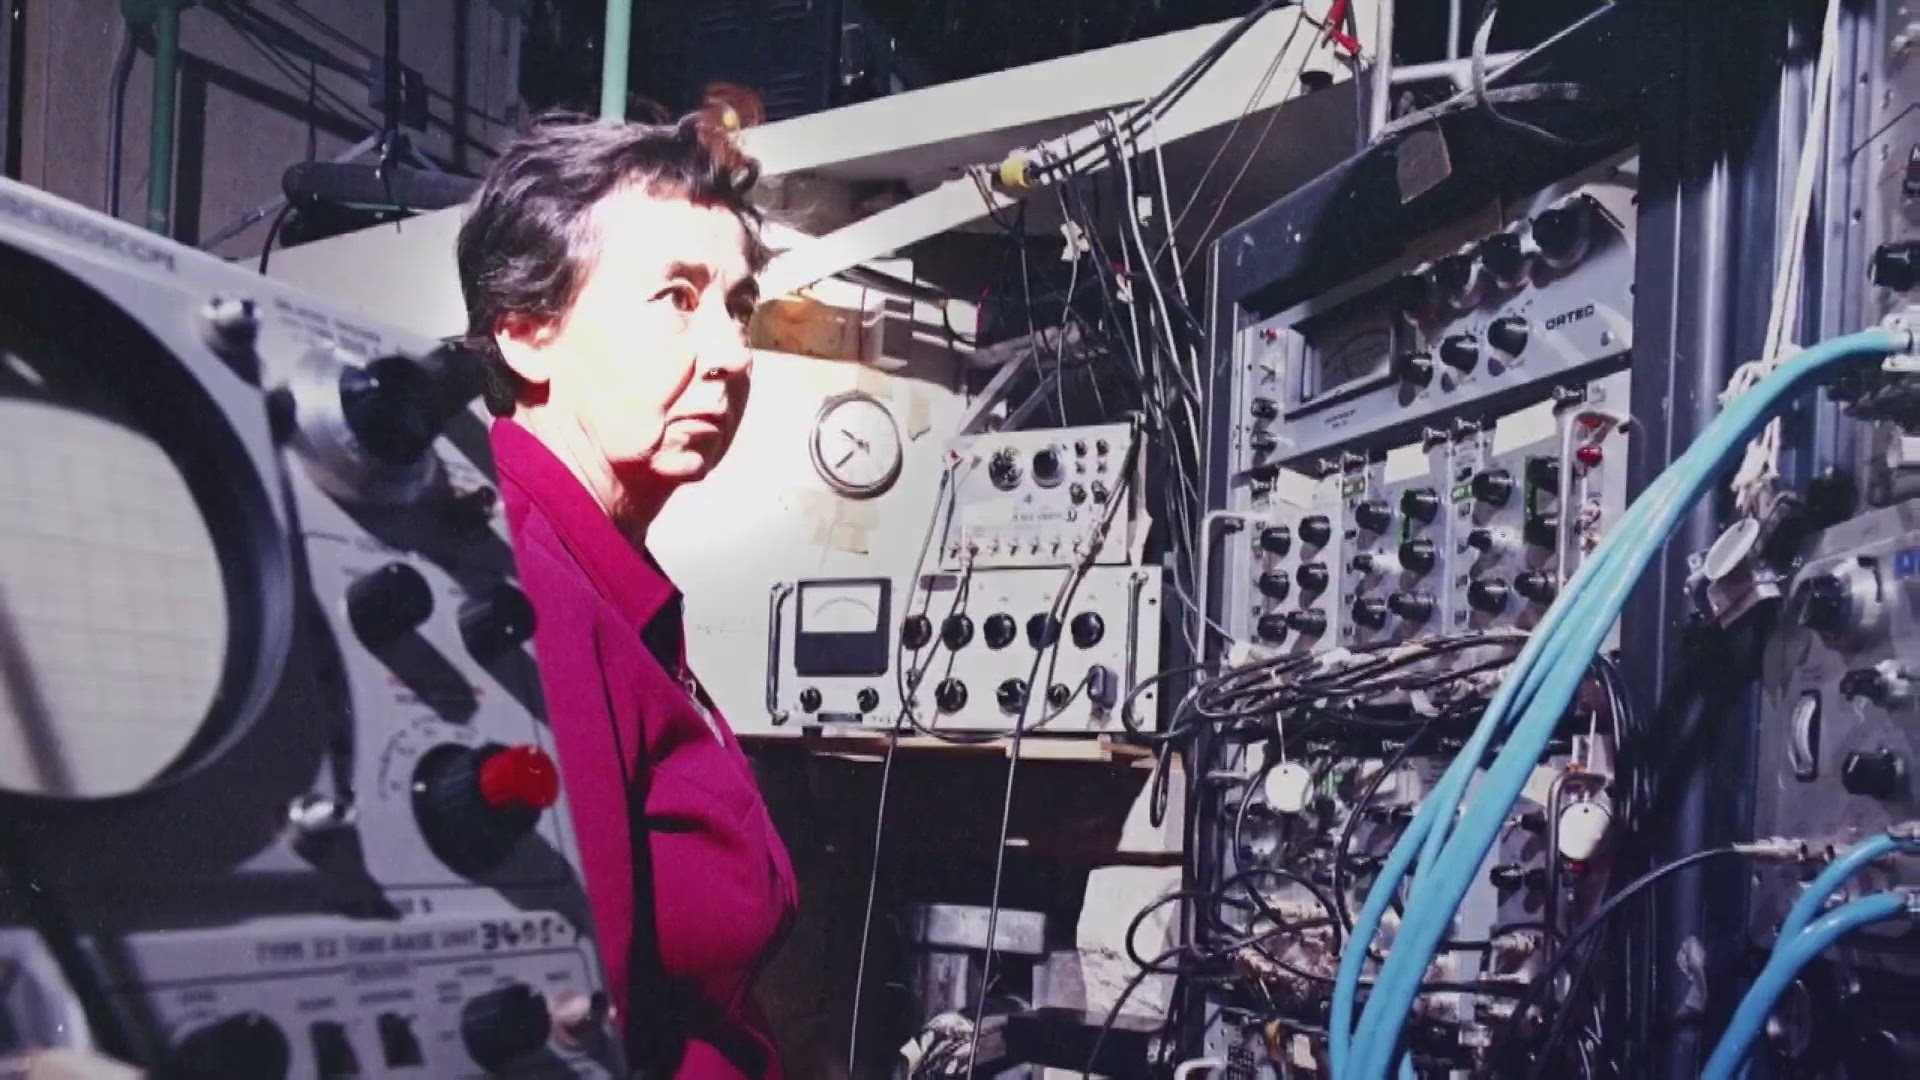 Oak Ridge National Laboratory posted a video on social media celebrating the women making an impact on fields like chemistry and particle physics.